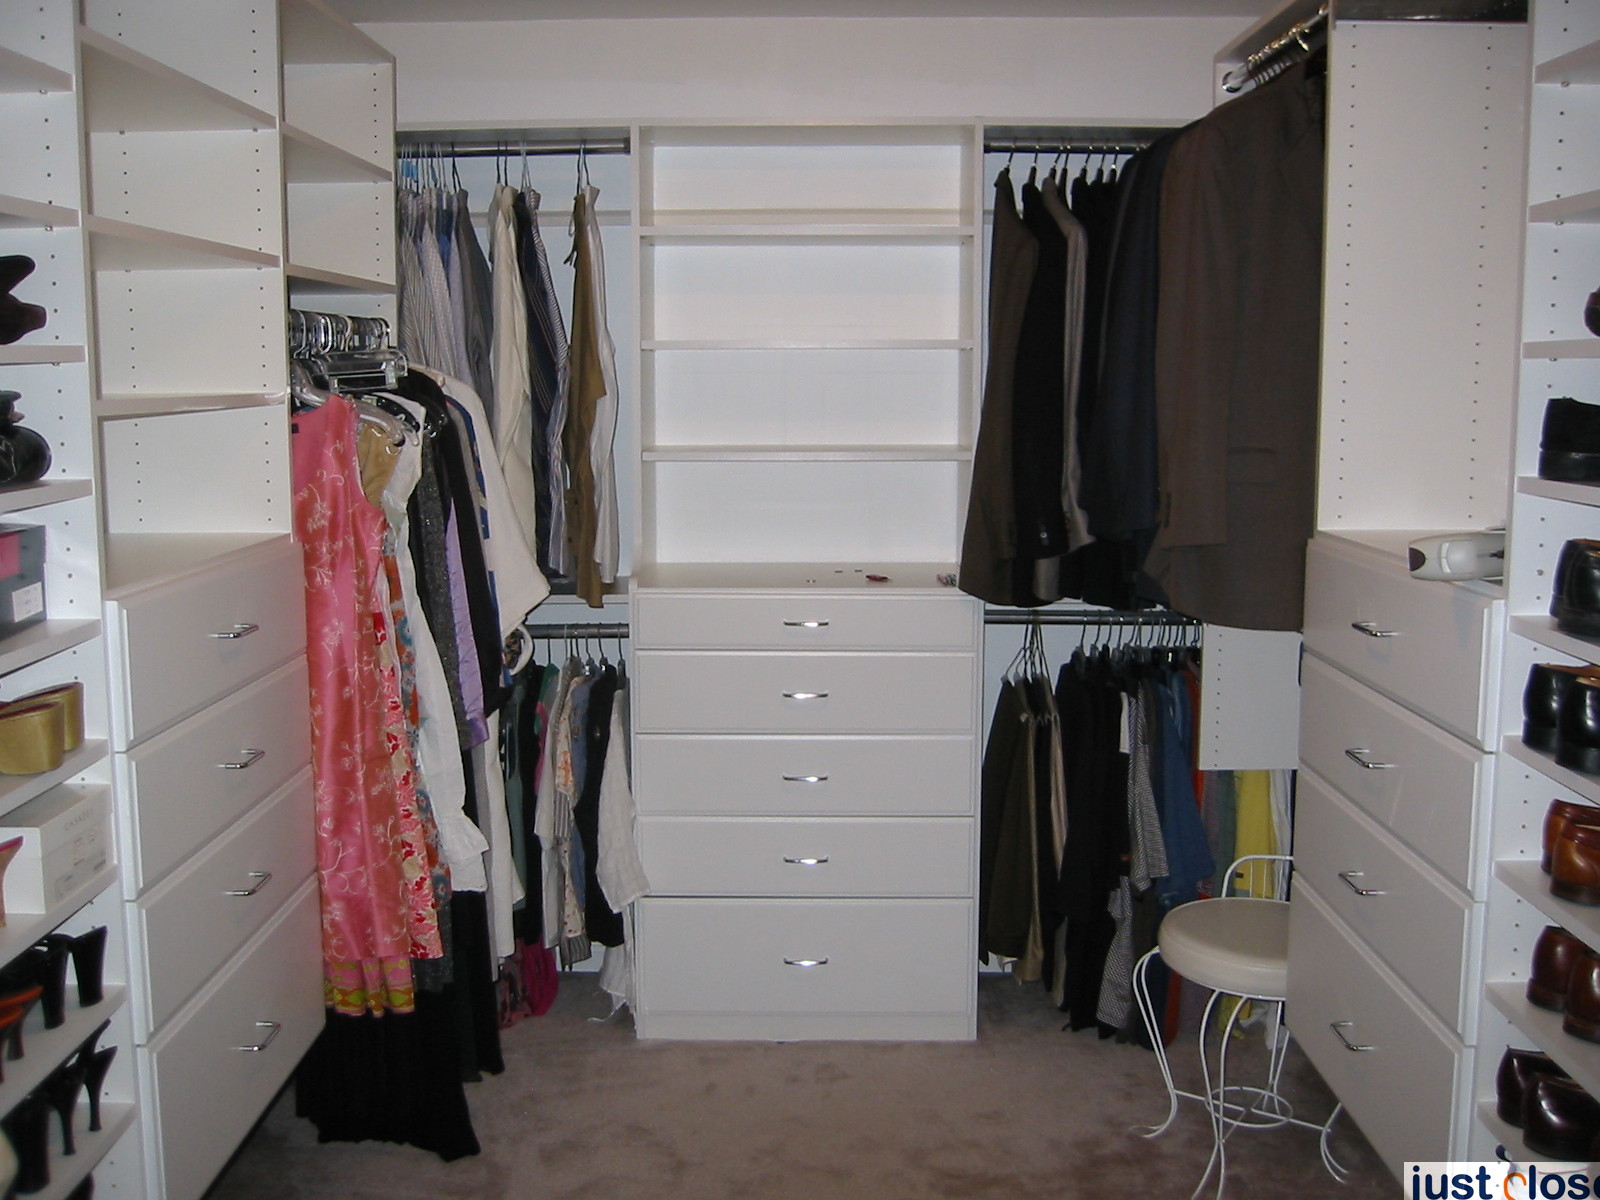 How to Purge Your Closet Just Closets